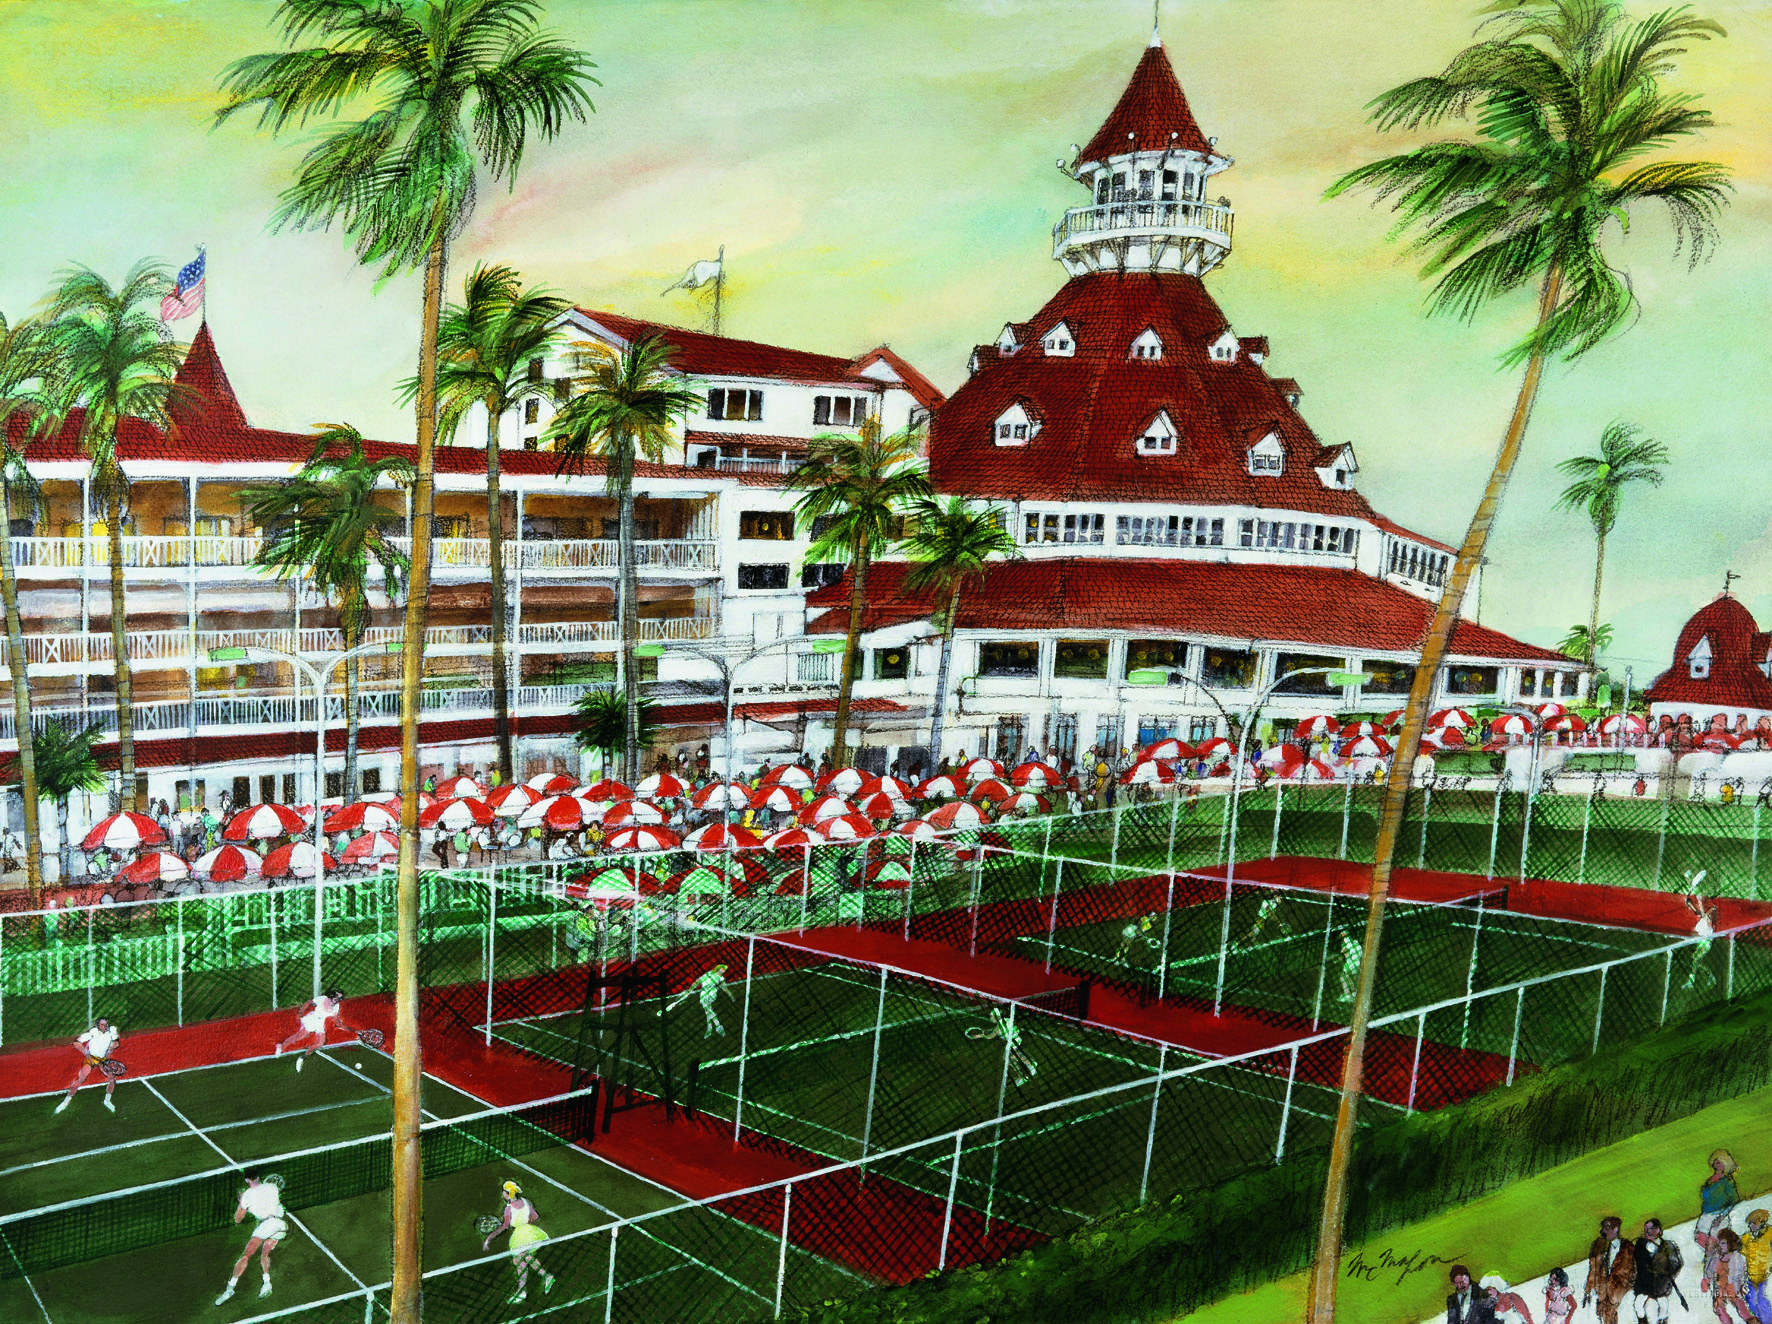   © The Stylish Life - Tennis, published by teNeues, www.teneues.com. Tennis Courts at Hotel Del Coronado, Photo © Franklin McMahon/CORBIS.  